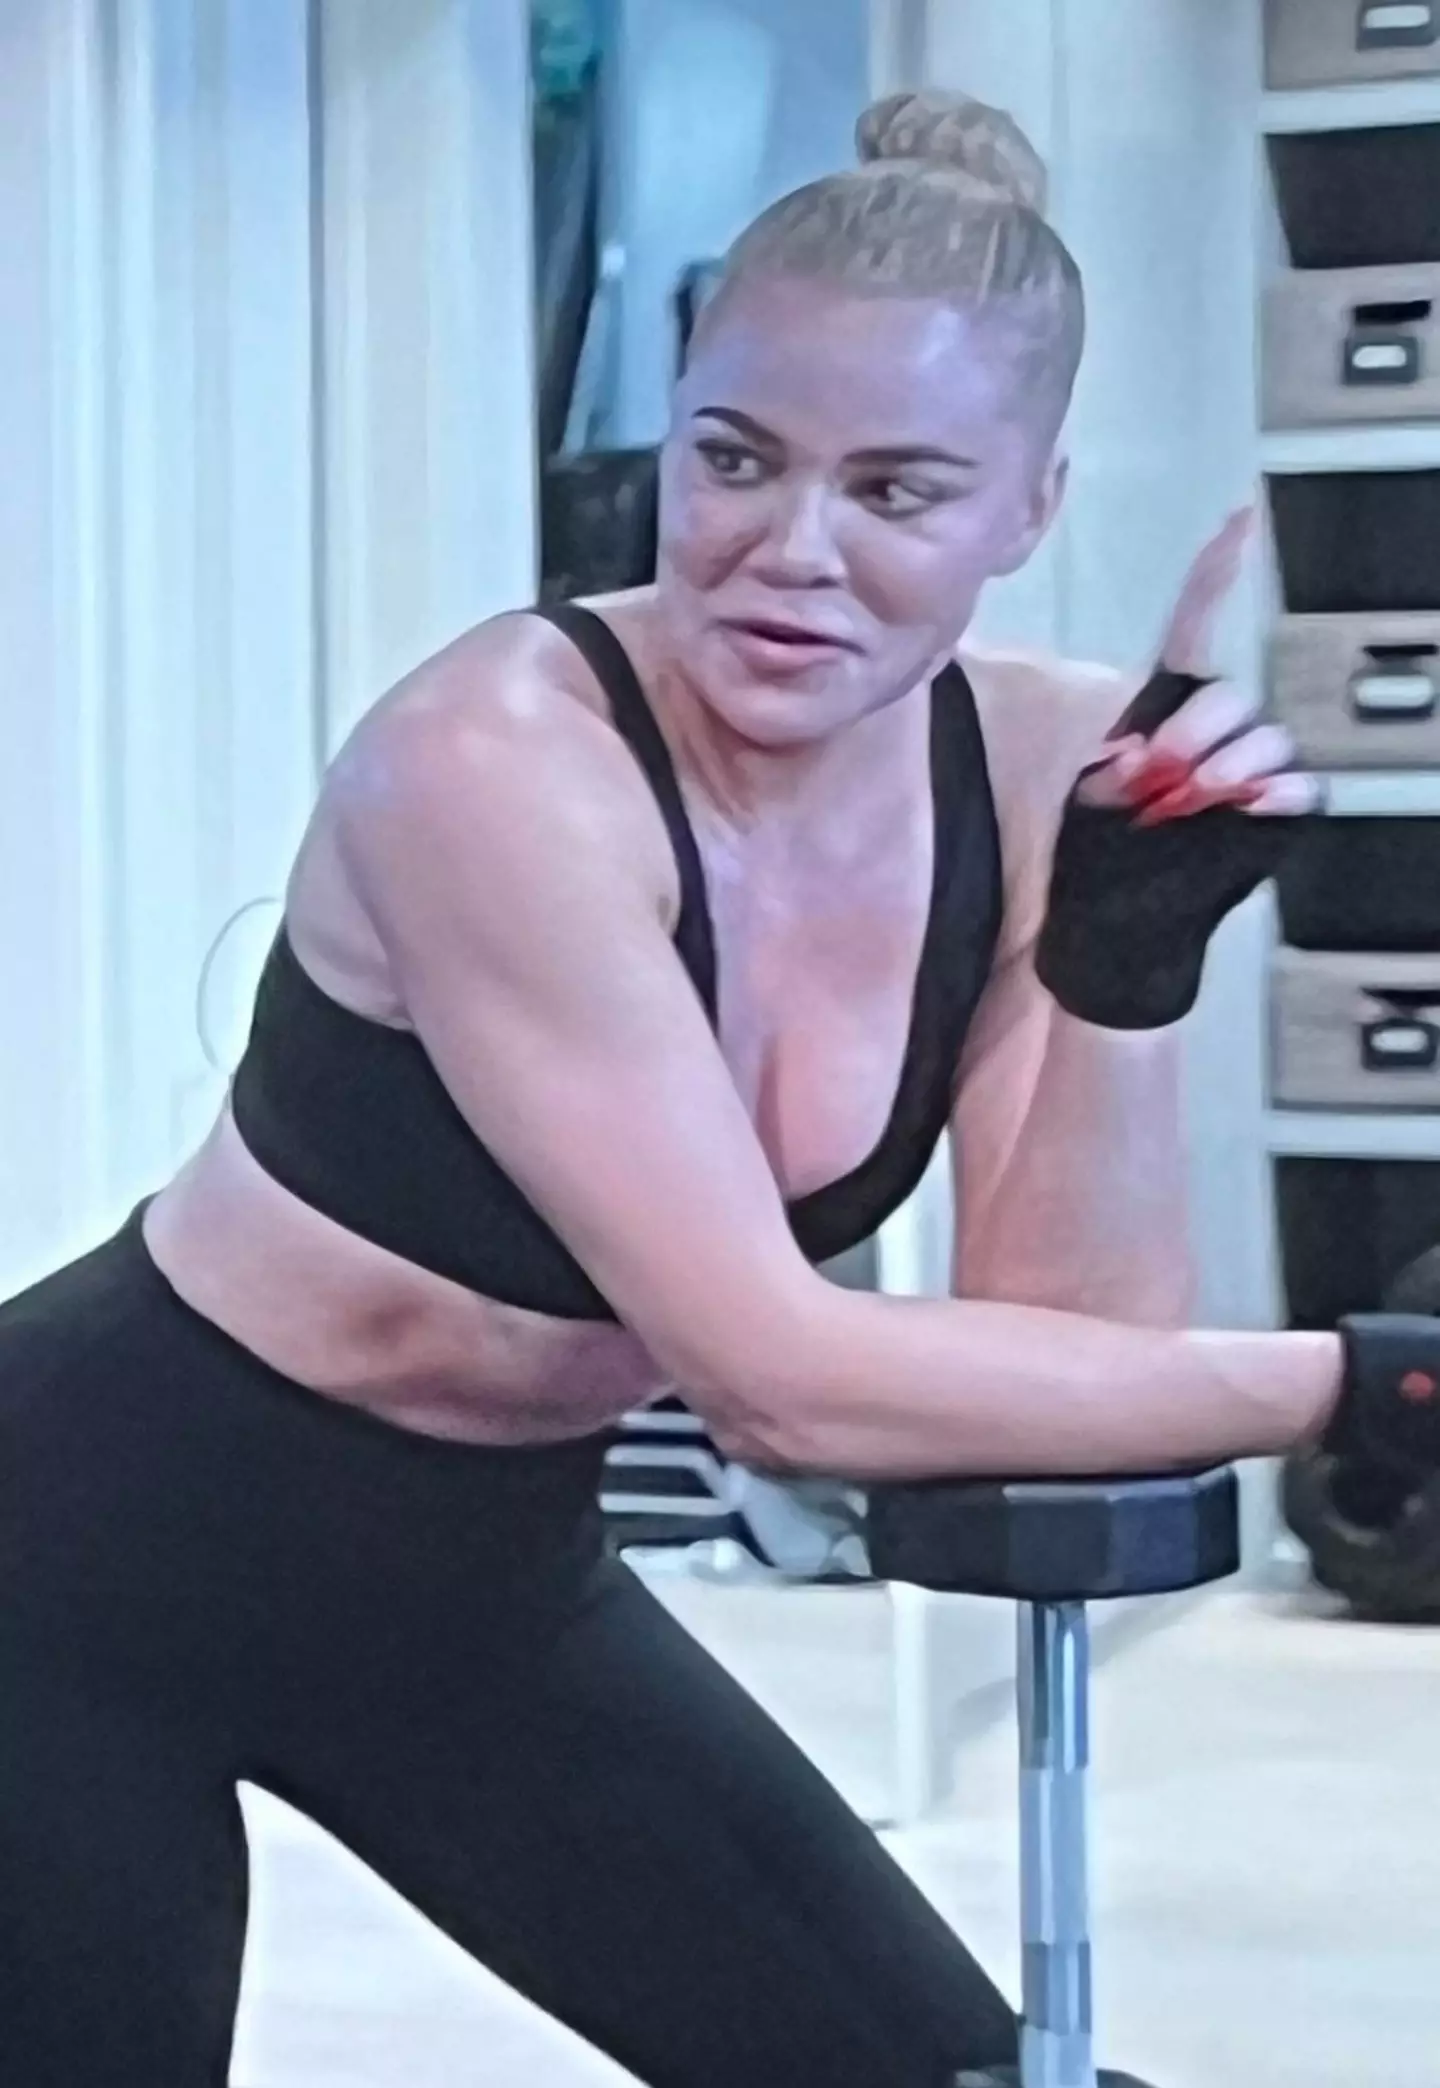 Khloe was spotted make-up free at the gym.